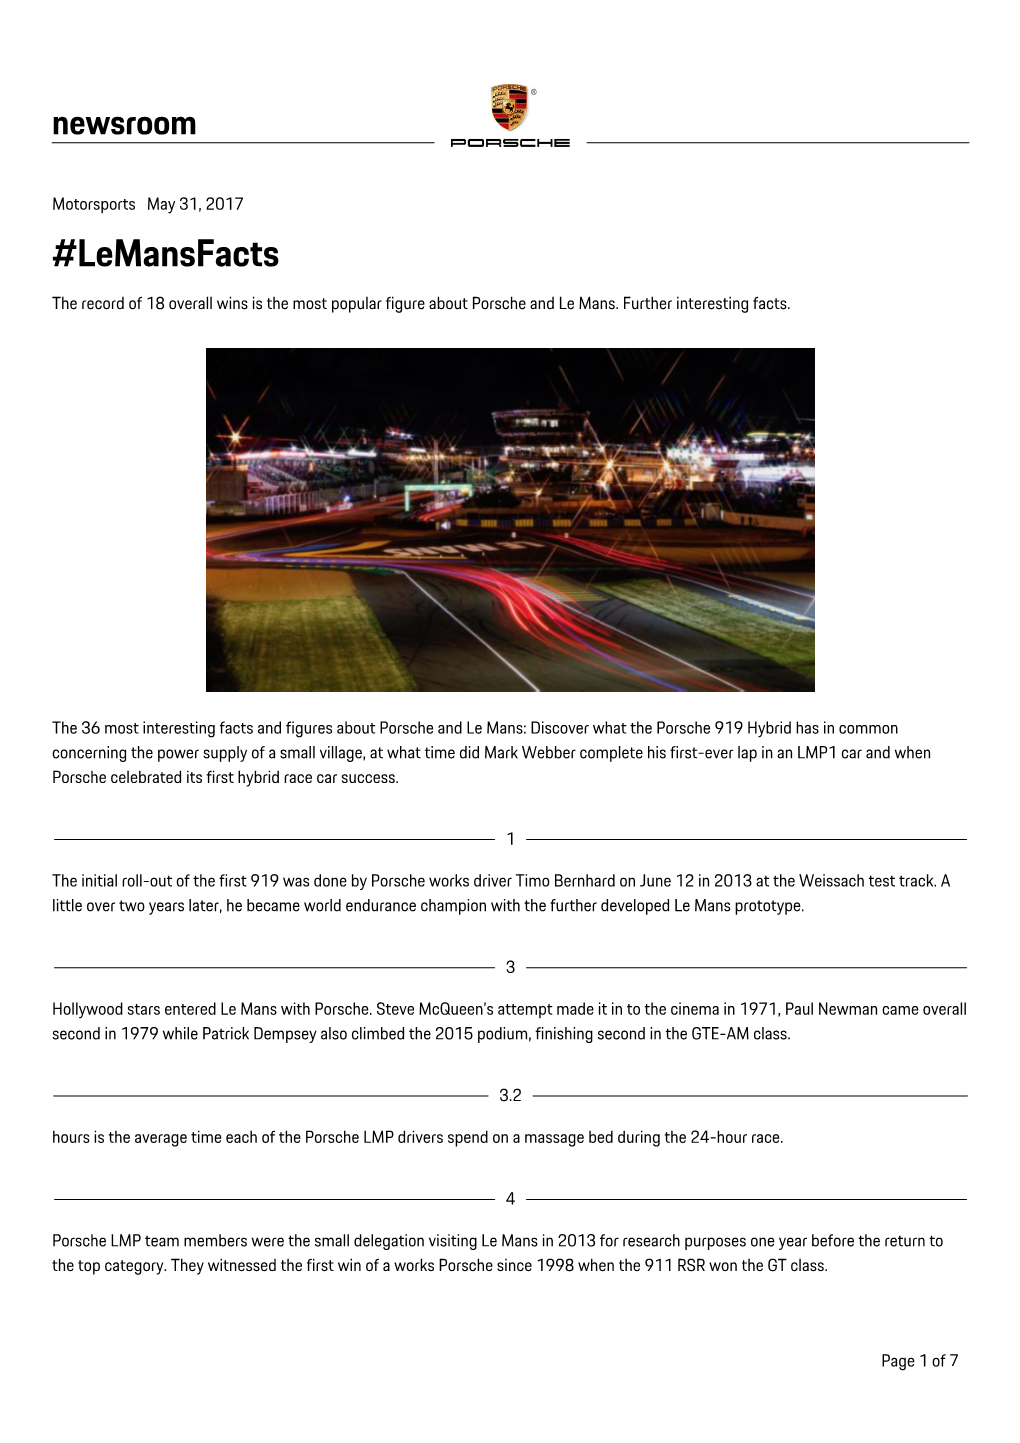 Lemansfacts the Record of 18 Overall Wins Is the Most Popular Figure About Porsche and Le Mans